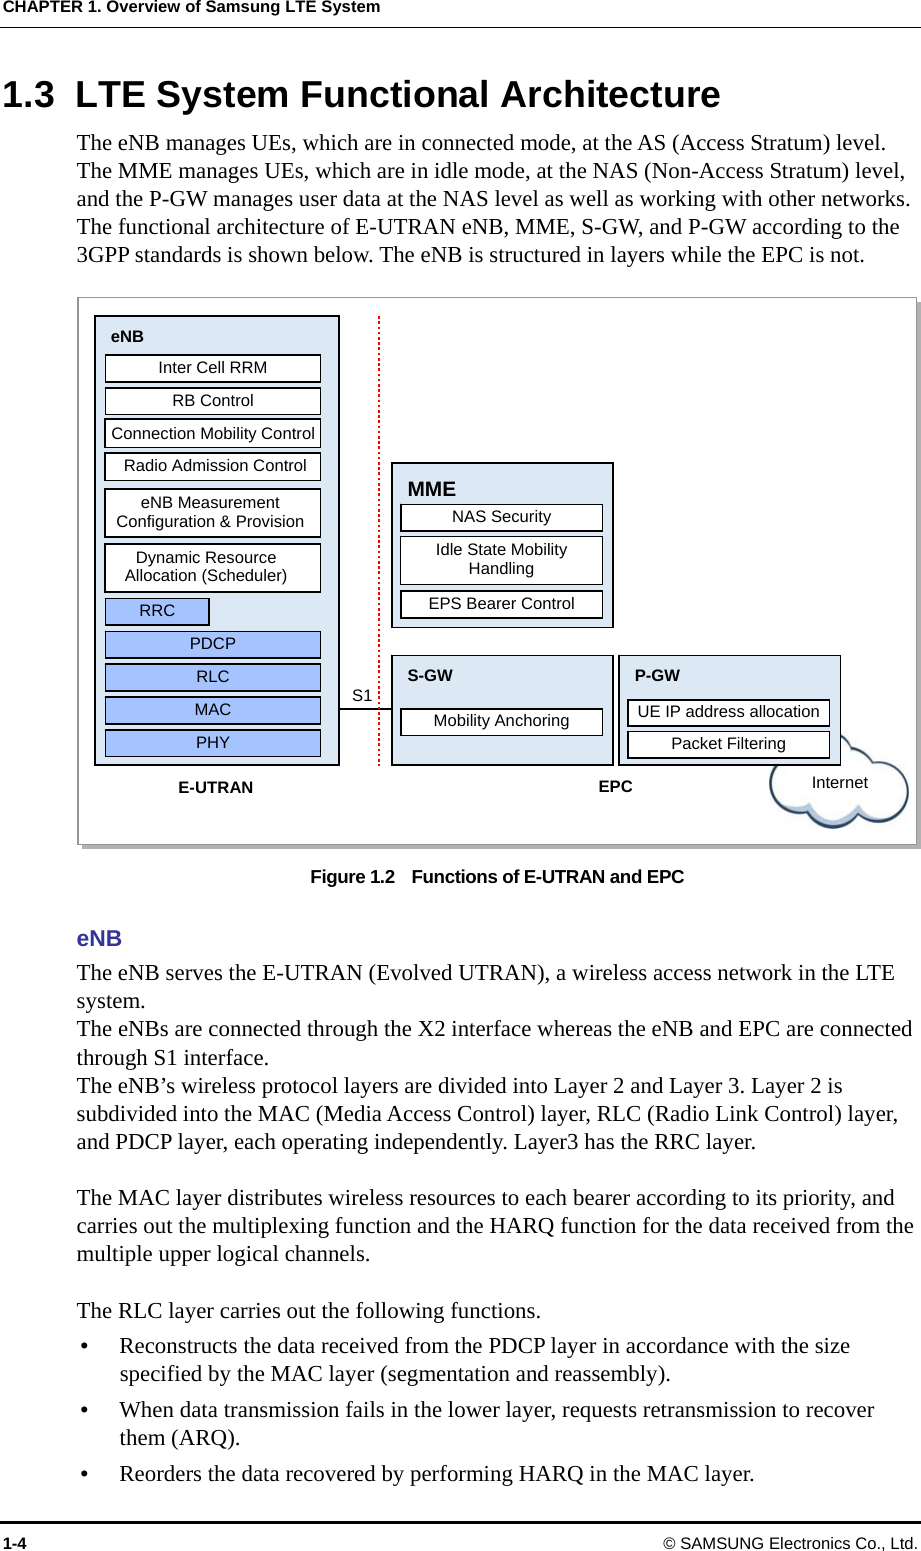 CHAPTER 1. Overview of Samsung LTE System 1.3  LTE System Functional Architecture The eNB manages UEs, which are in connected mode, at the AS (Access Stratum) level. The MME manages UEs, which are in idle mode, at the NAS (Non-Access Stratum) level, and the P-GW manages user data at the NAS level as well as working with other networks.   The functional architecture of E-UTRAN eNB, MME, S-GW, and P-GW according to the 3GPP standards is shown below. The eNB is structured in layers while the EPC is not.  E-UTRAN PHY MAC RLC PDCP RRC Dynamic Resource Allocation (Scheduler) eNB Measurement Configuration &amp; Provision Radio Admission Control Connection Mobility Control RB Control Inter Cell RRM eNB S1MME NAS Security Idle State Mobility Handling EPS Bearer Control S-GW Mobility Anchoring P-GW Packet Filtering UE IP address allocation EPC  Internet Figure 1.2    Functions of E-UTRAN and EPC  eNB The eNB serves the E-UTRAN (Evolved UTRAN), a wireless access network in the LTE system. The eNBs are connected through the X2 interface whereas the eNB and EPC are connected through S1 interface. The eNB’s wireless protocol layers are divided into Layer 2 and Layer 3. Layer 2 is subdivided into the MAC (Media Access Control) layer, RLC (Radio Link Control) layer, and PDCP layer, each operating independently. Layer3 has the RRC layer.  The MAC layer distributes wireless resources to each bearer according to its priority, and carries out the multiplexing function and the HARQ function for the data received from the multiple upper logical channels.  The RLC layer carries out the following functions.  Reconstructs the data received from the PDCP layer in accordance with the size specified by the MAC layer (segmentation and reassembly).  When data transmission fails in the lower layer, requests retransmission to recover them (ARQ).  Reorders the data recovered by performing HARQ in the MAC layer. 1-4 © SAMSUNG Electronics Co., Ltd. 